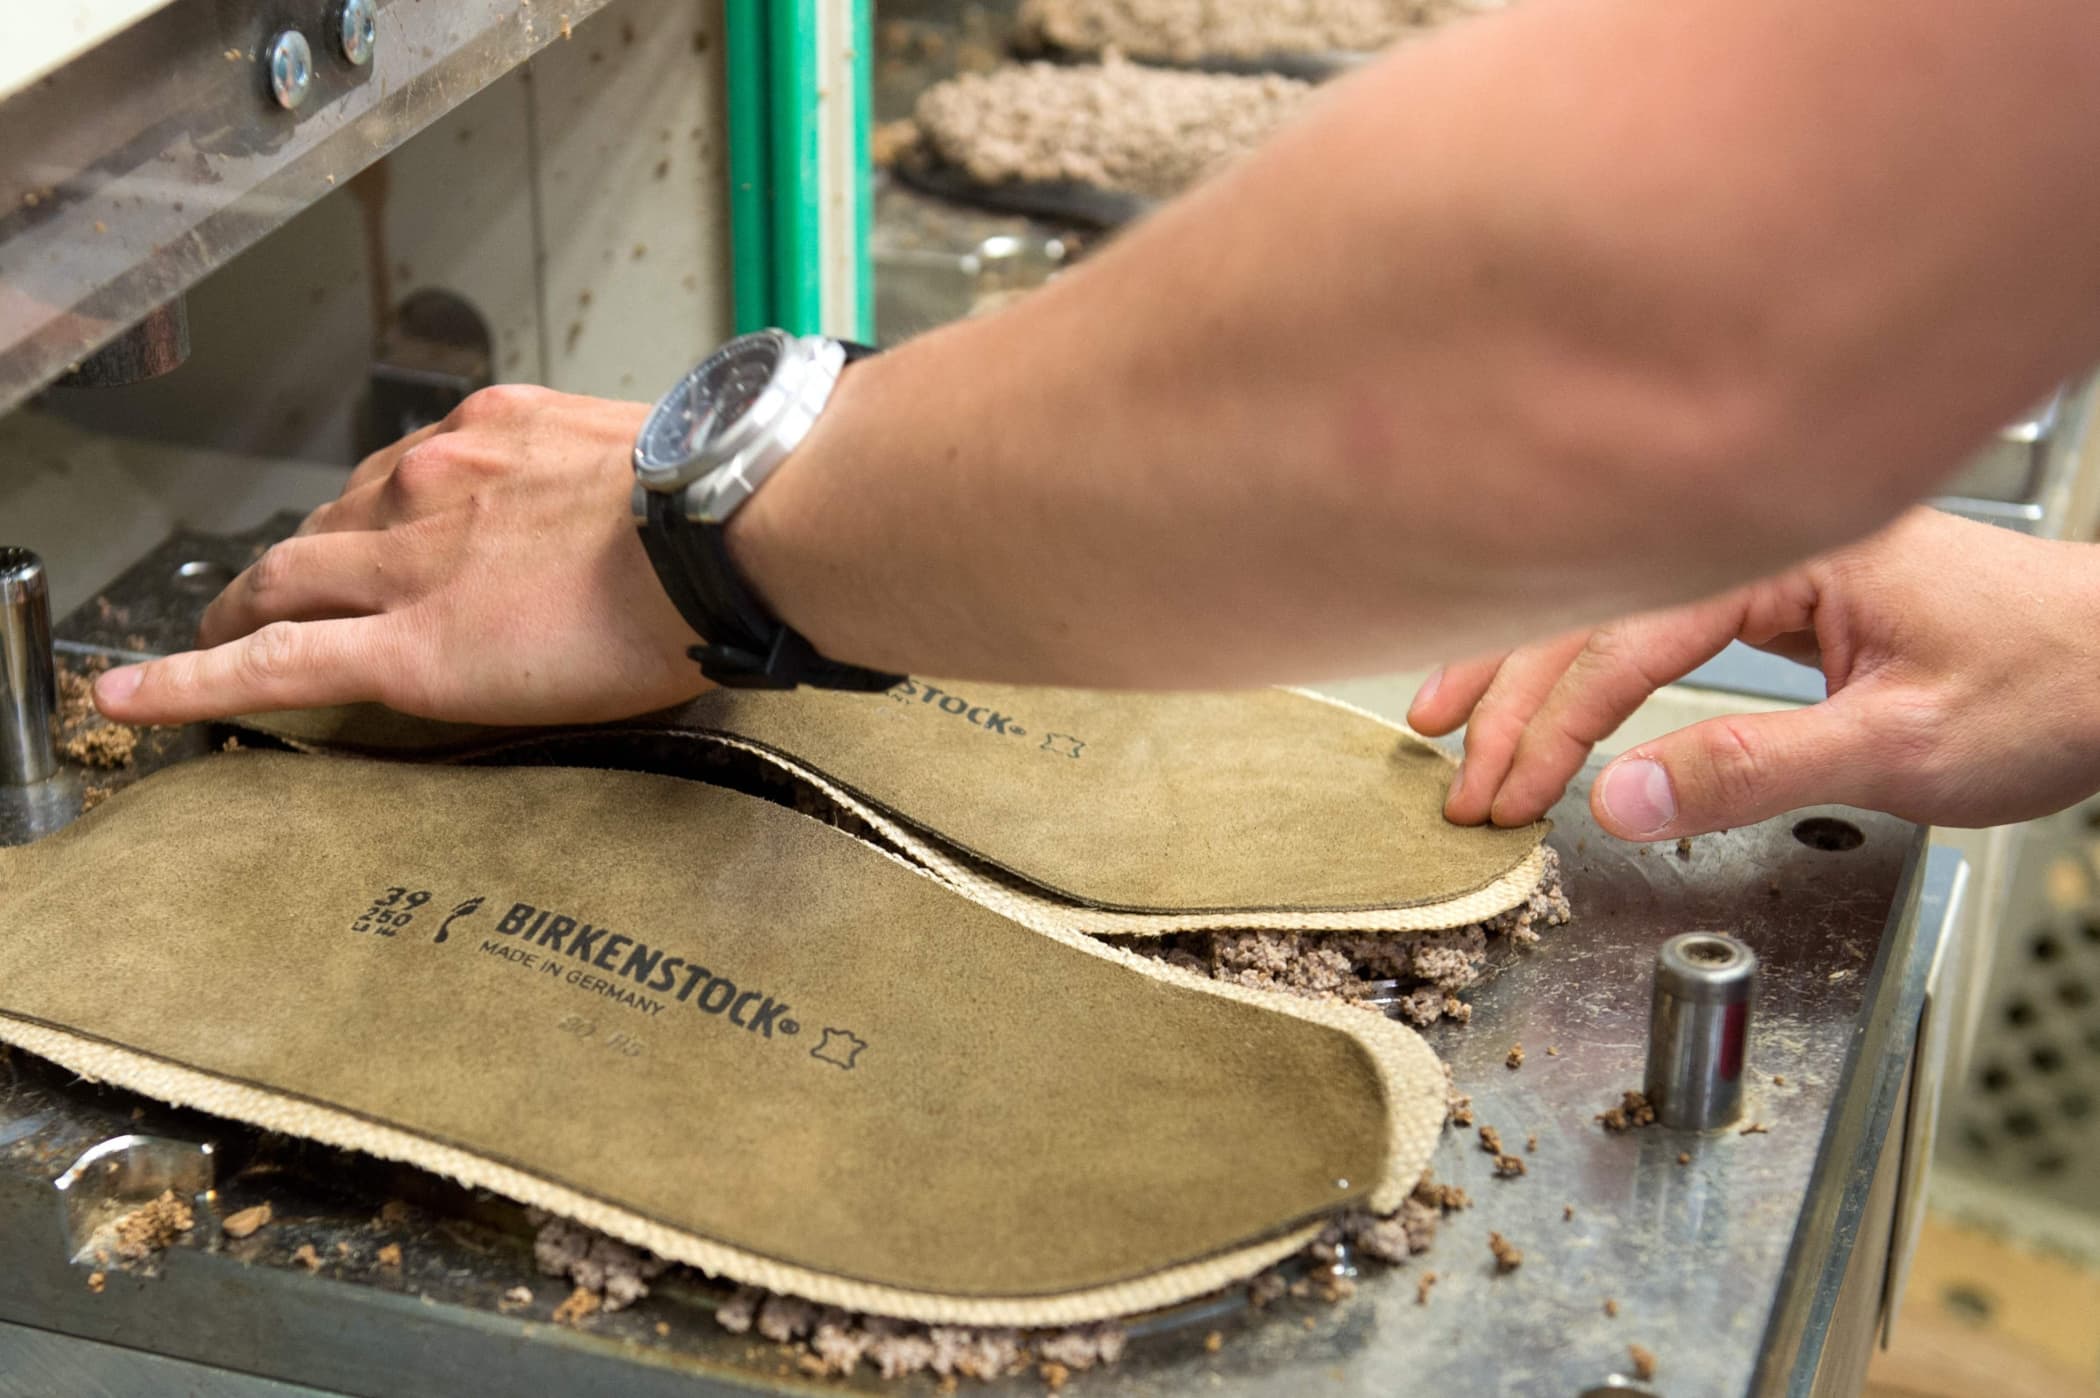 Birkenstock IPO expected to prove the next test of investor appetite for deals